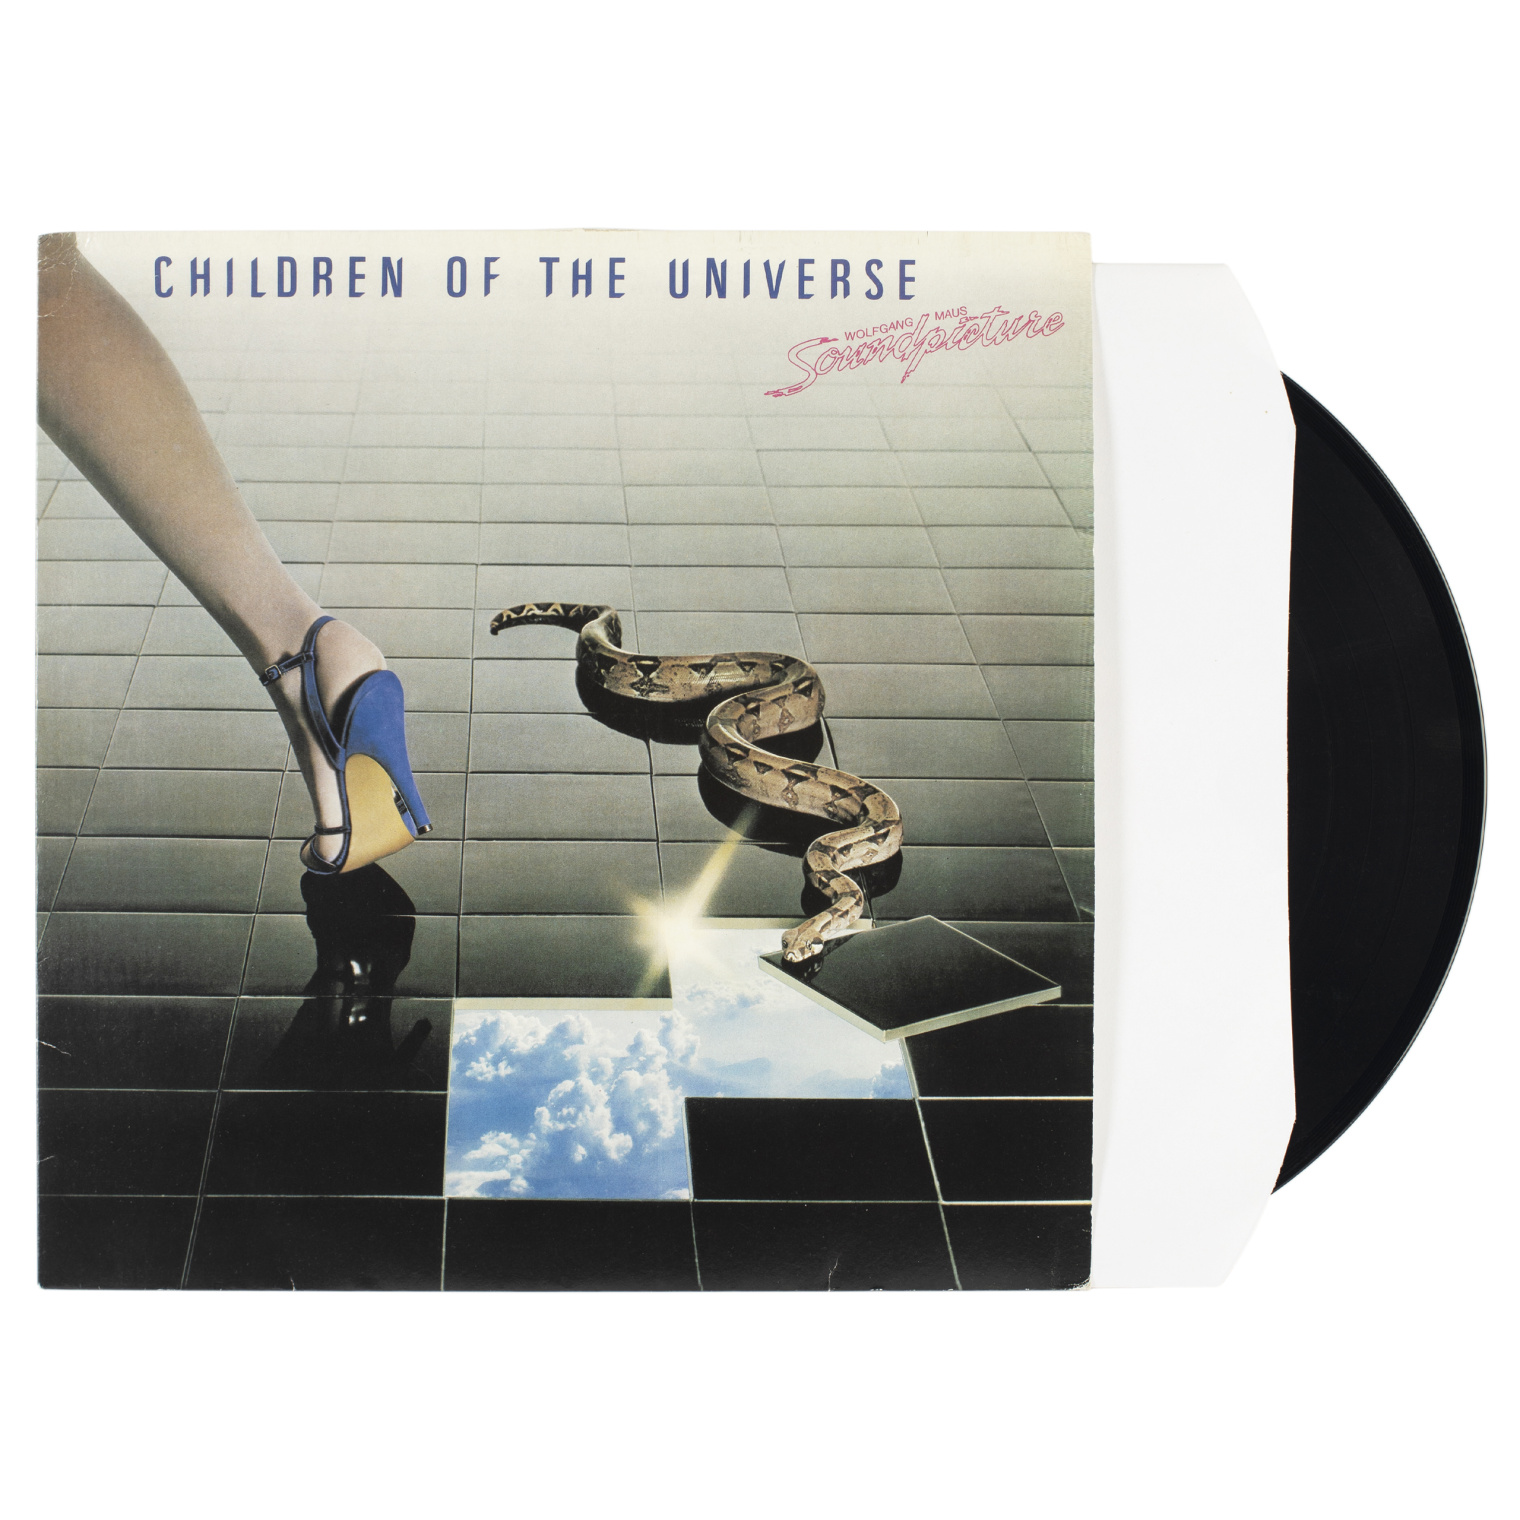  Винил Wolfgang Maus Soundpicture - Children Of The Universe